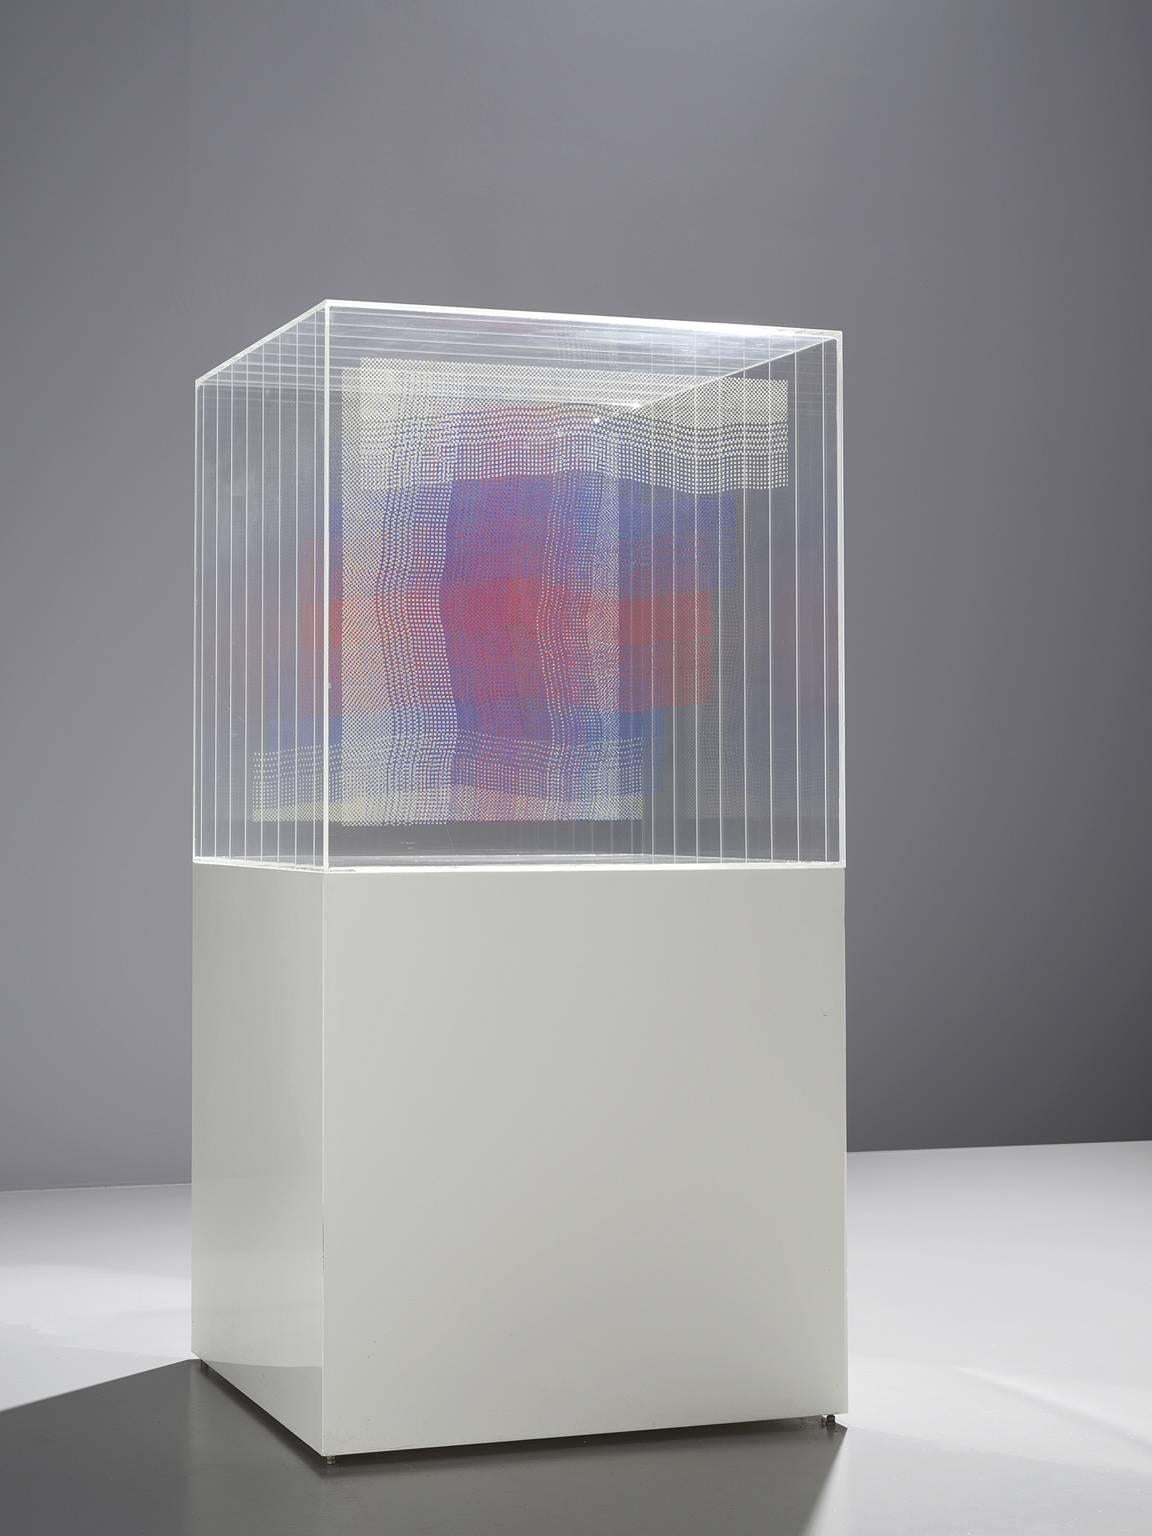 Artwork, wooden pedestal with perspex cube and layers in blue white and red by Maria Westra, The Netherlands, 1985.

This cubistic abstract piece is derived from Westra's interest in monumental fabrics and weaving. Westra's main interest lies in the